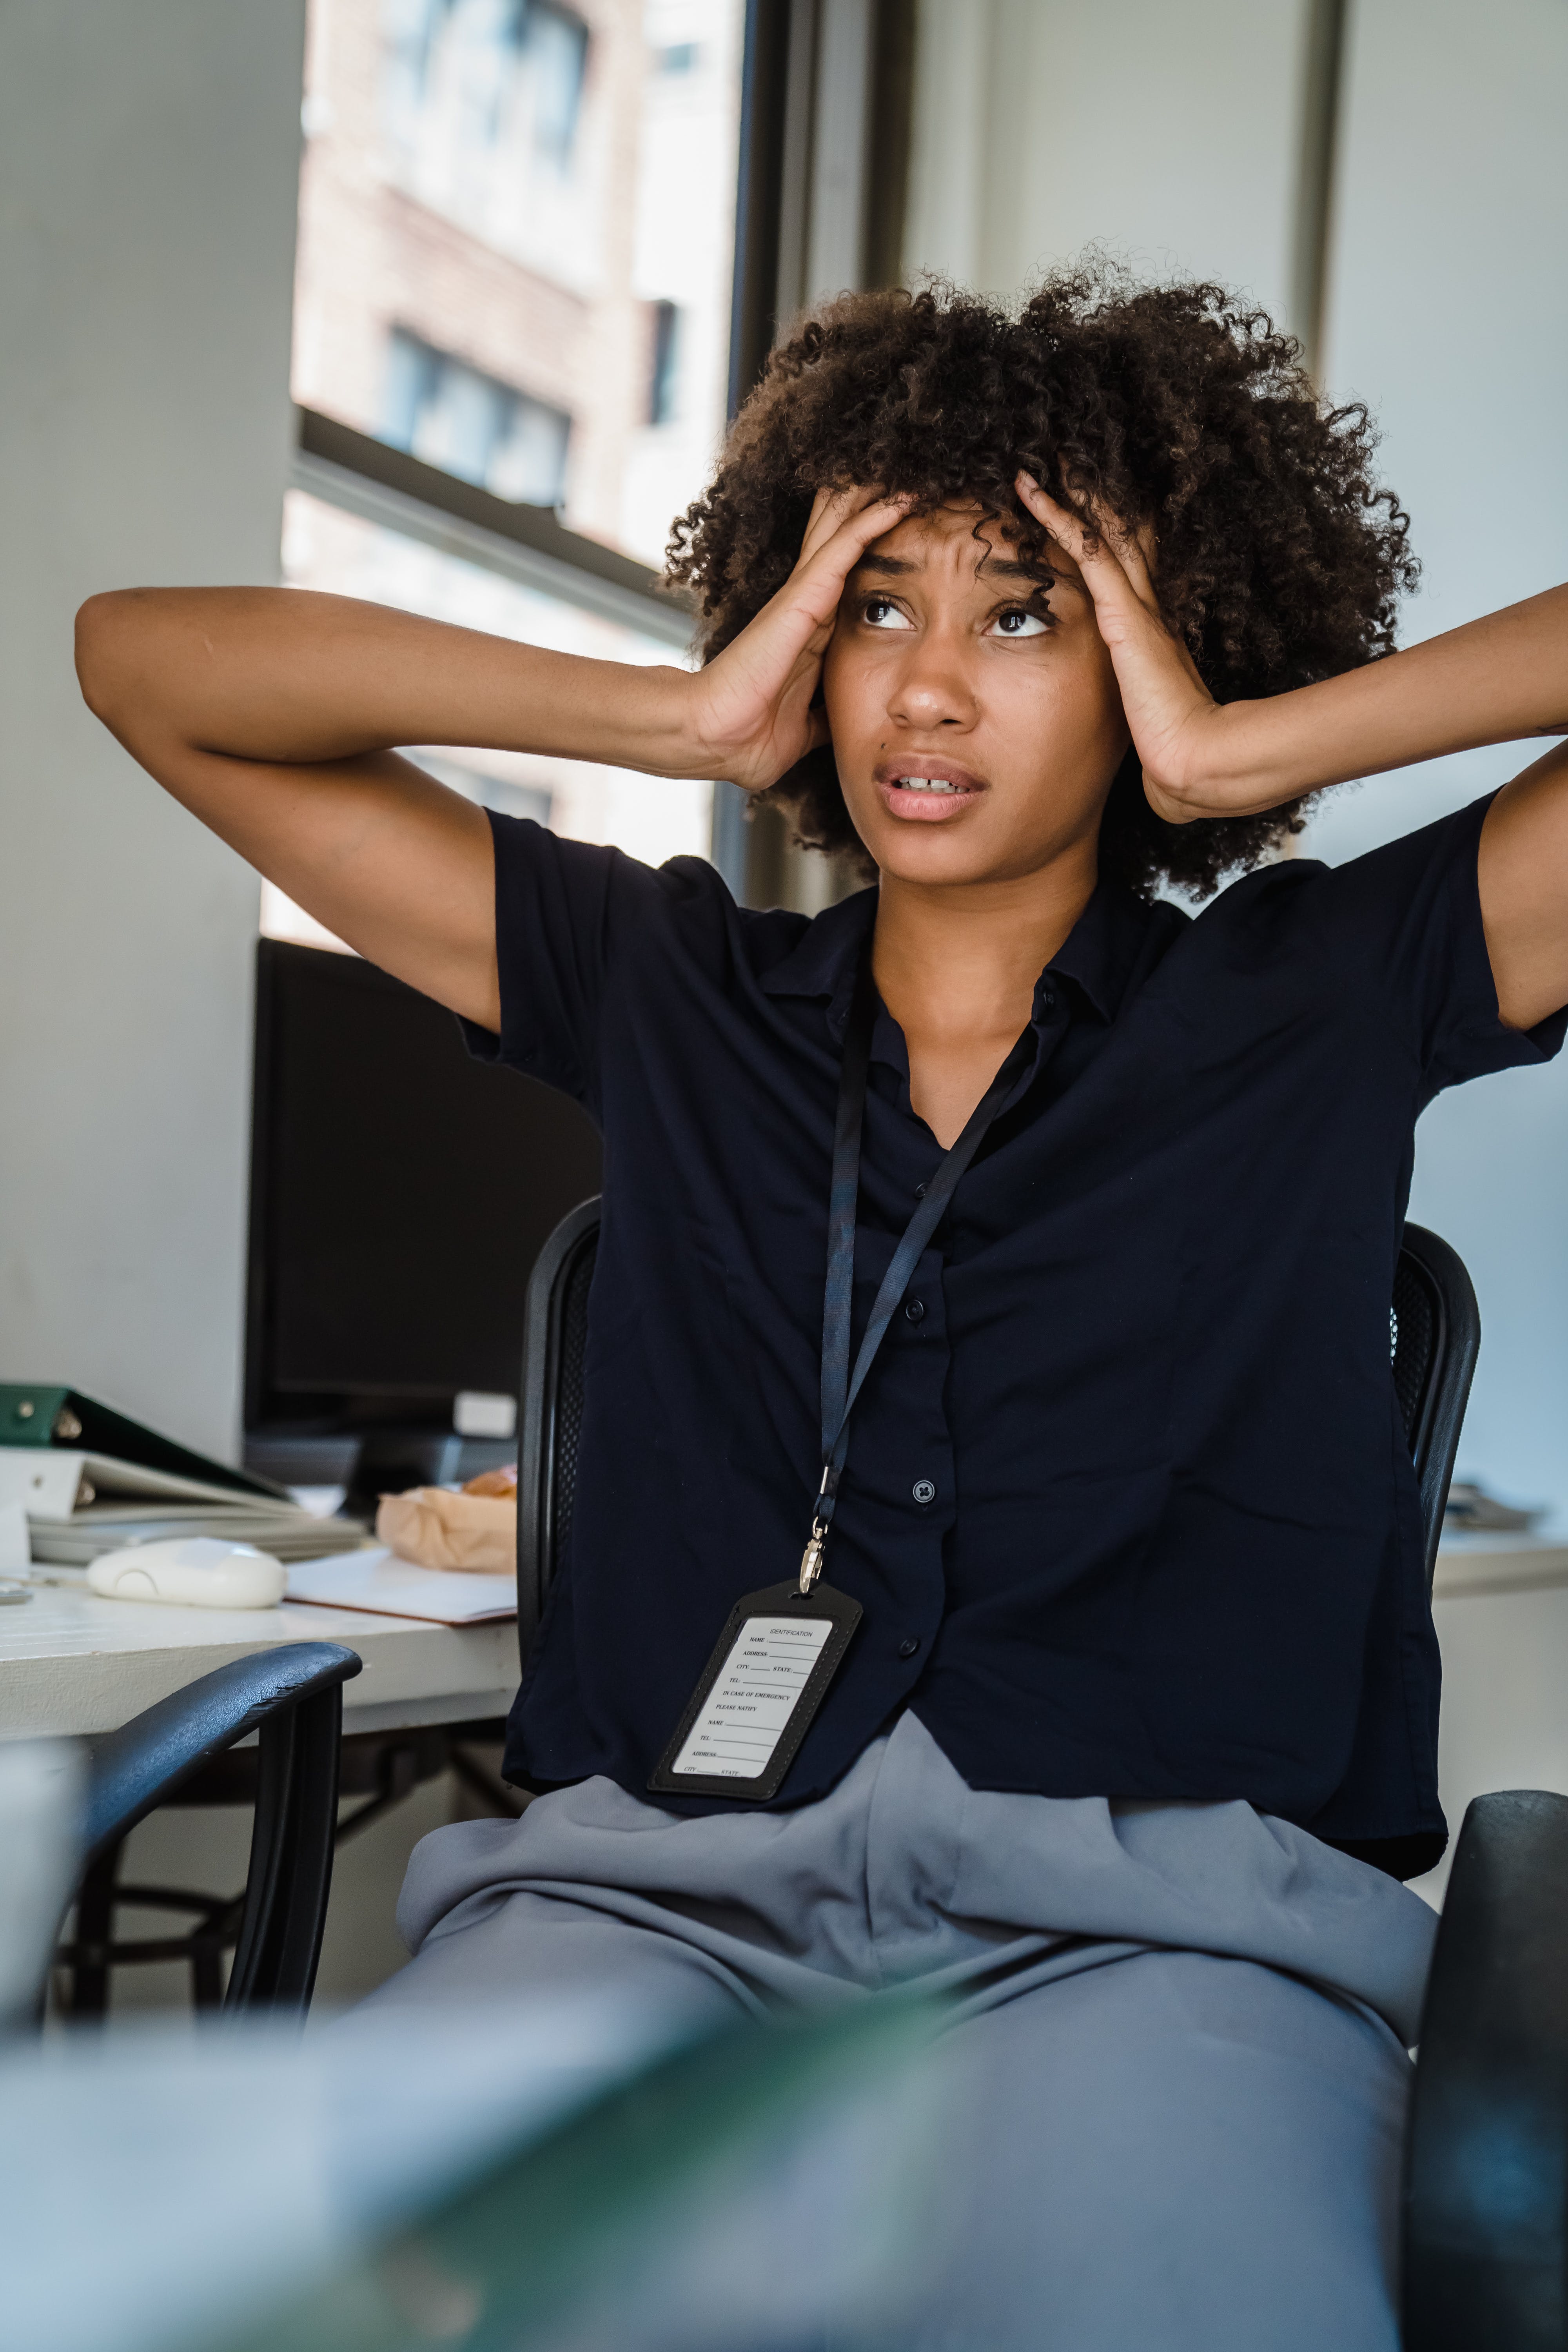 A frustrated woman sitting down and holding her head while looking to the side | Source: Pexels